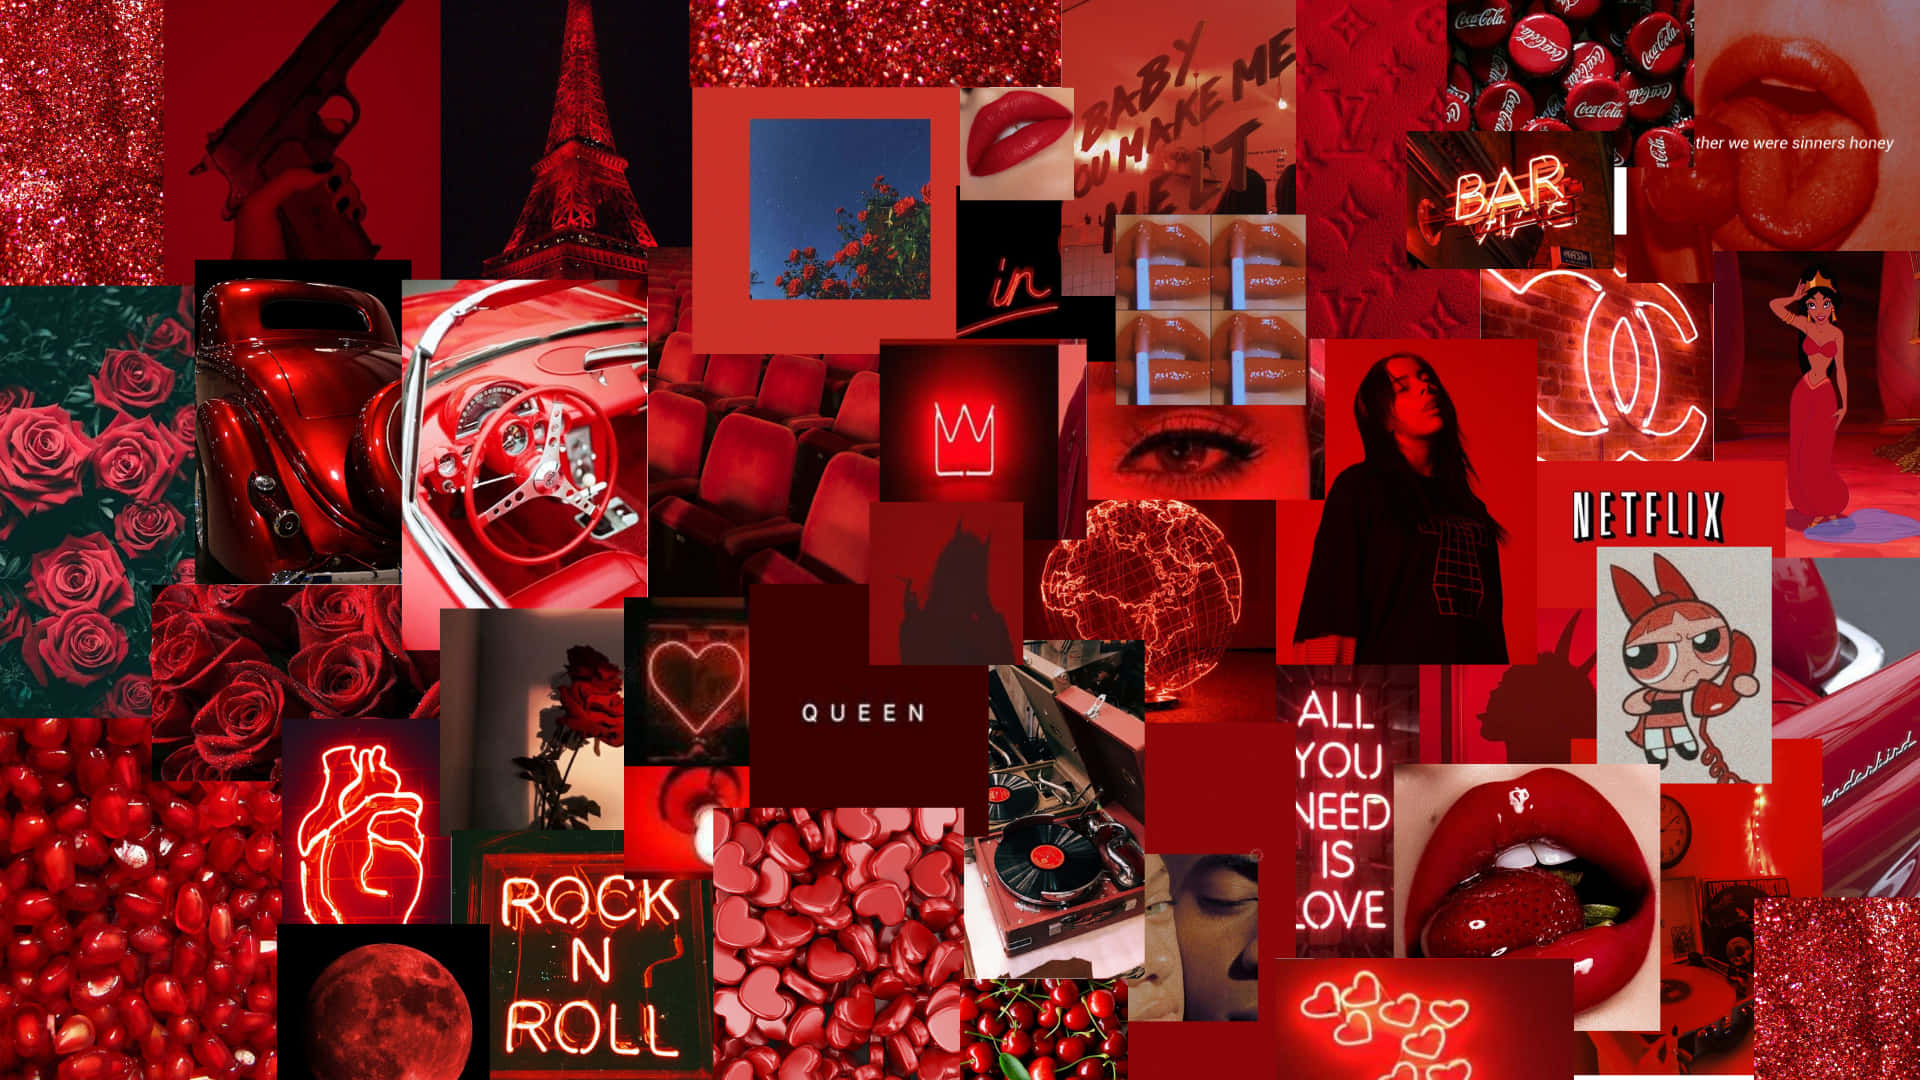 Download Immersed in the Red Aesthetic - Laptop, Lips, Roses. Wallpaper ...